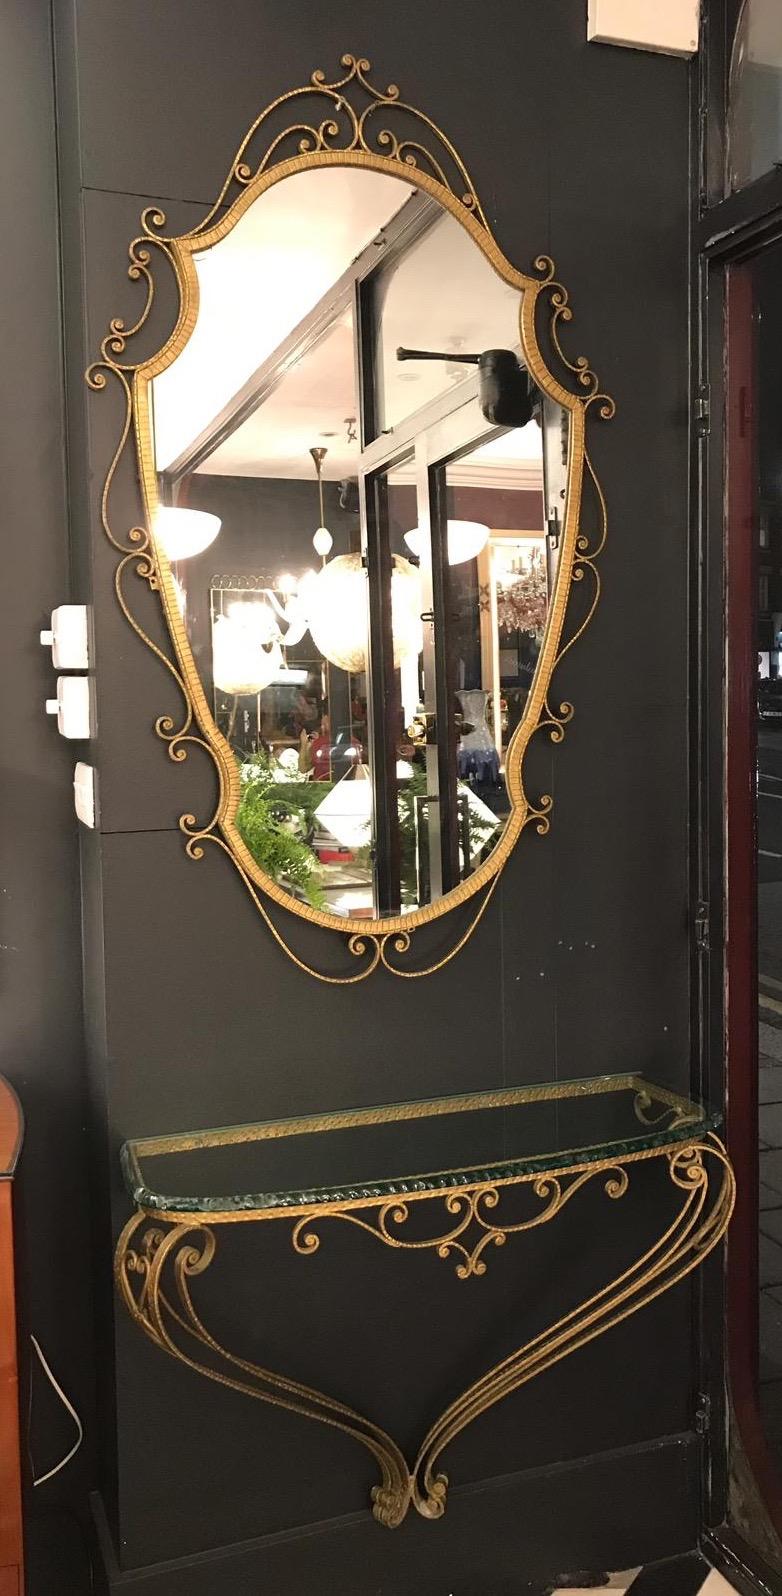 Matching mirror and console table by Pier Luigi colli made from hammered wrought iron featuring a gilt finish - 2cm thick glass top att. to Fontana Arte.  

The mirror measurements are 52 H x 30 W inches.
The console table is 25 H x 33 W inches.